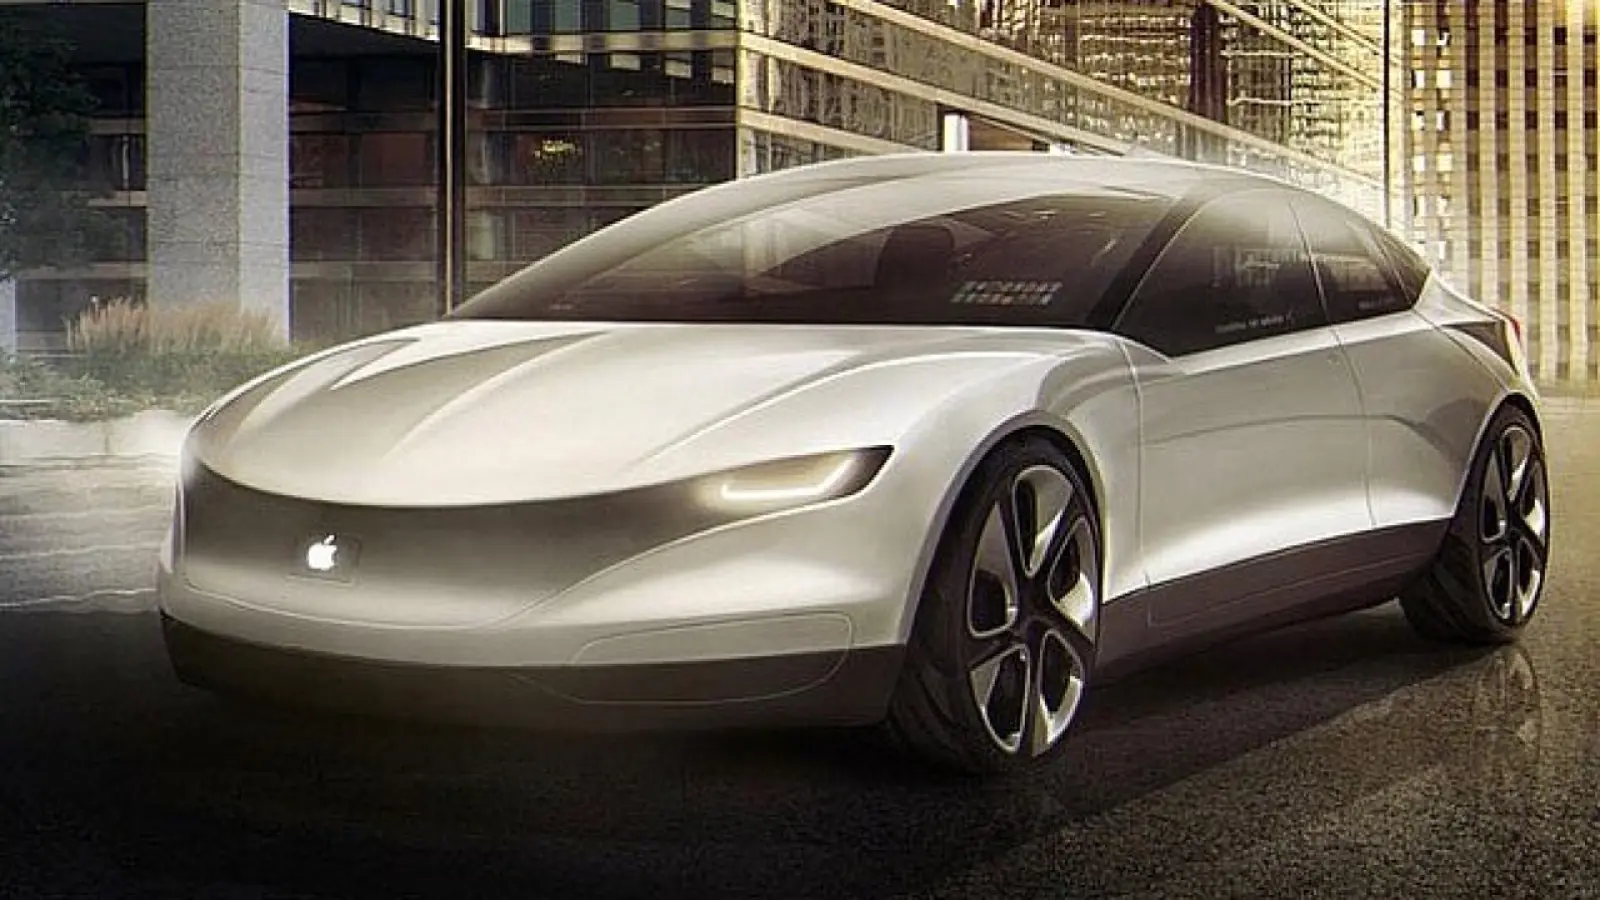 Launch of Apple's electric vehicle has been postponed until 2028